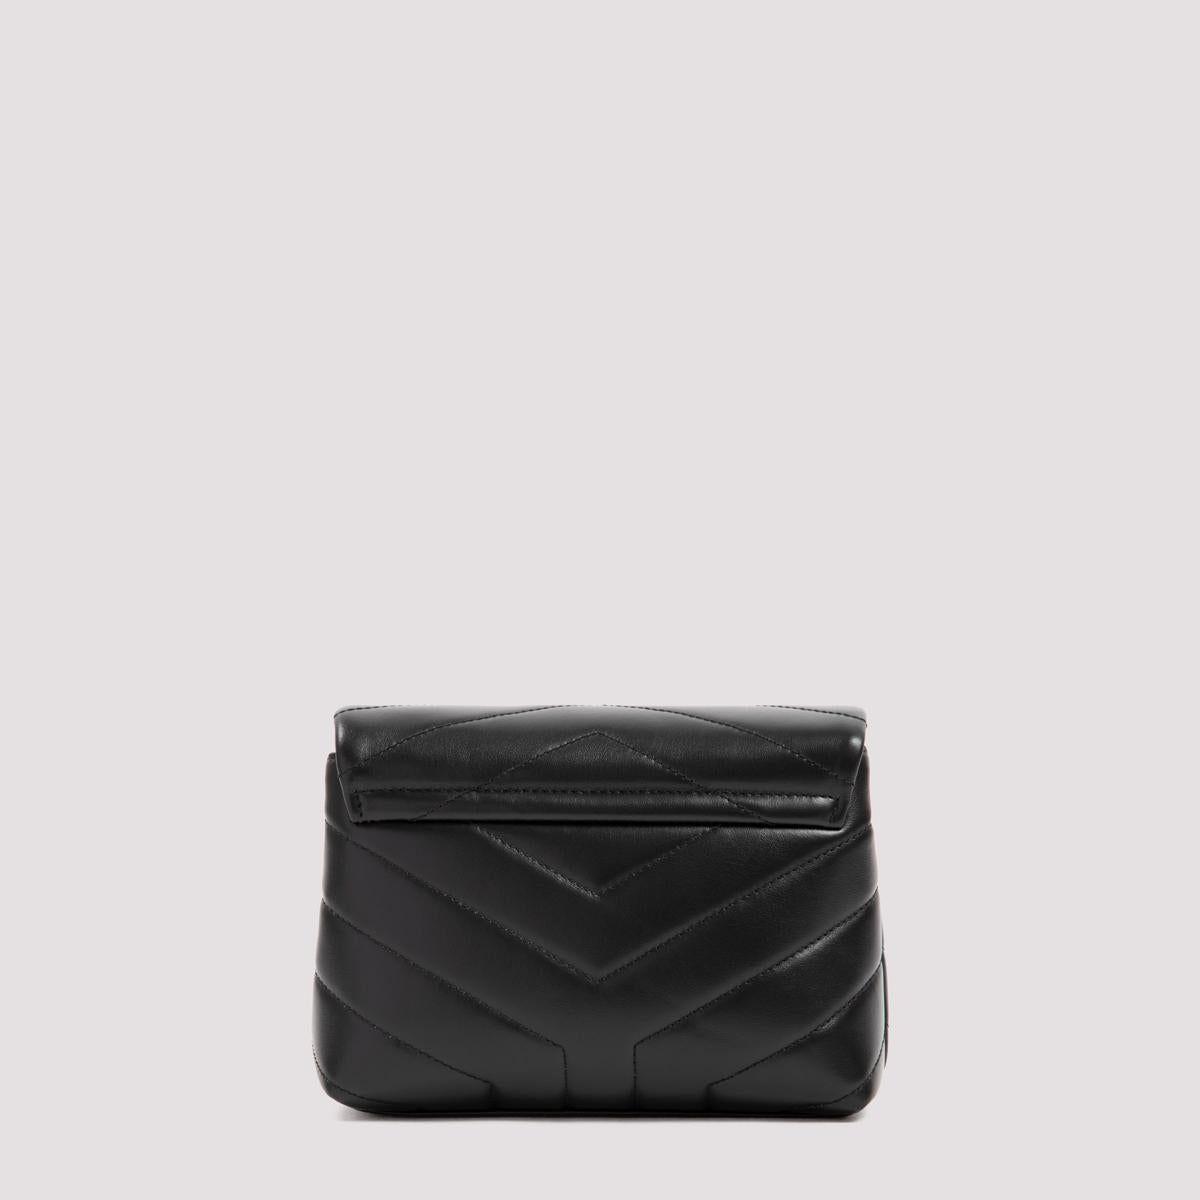 Saint Laurent Black Quilted Patent Leather Toy Loulou Crossbody